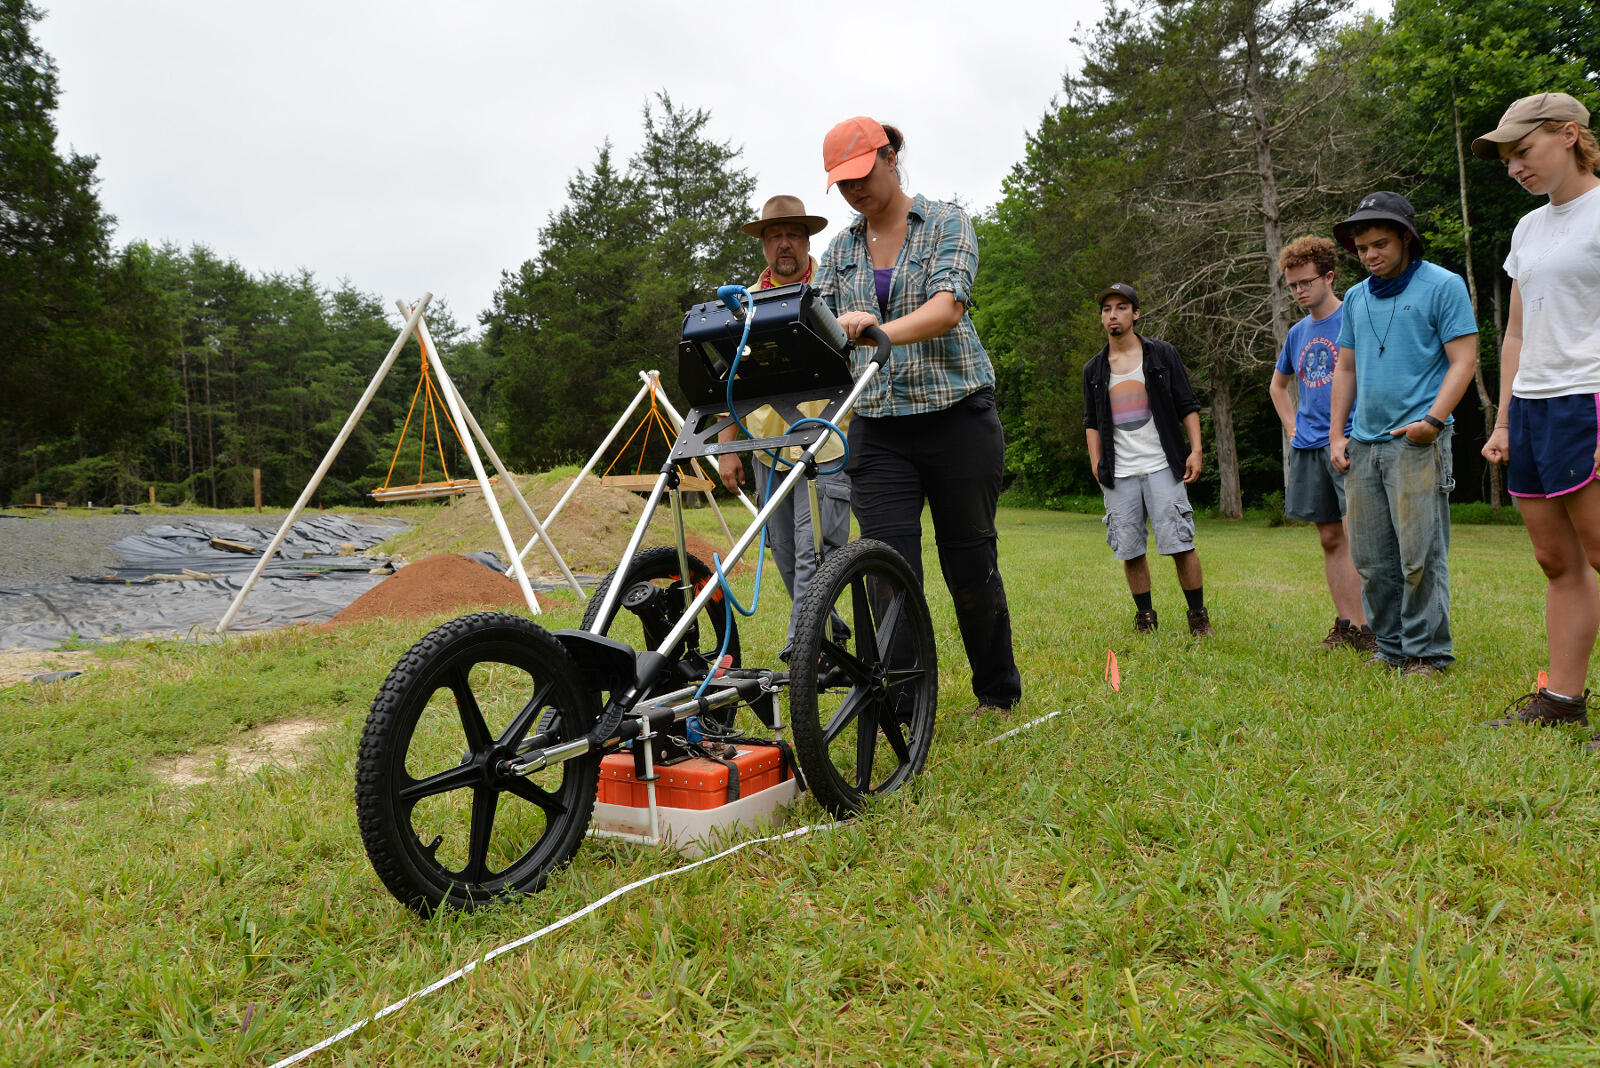 Jesse Adkins, a senior VCU history major, pushes a ground-penetrating radar device to search for buried anomolies at the Fort Germanna/Enchanted Castle site.